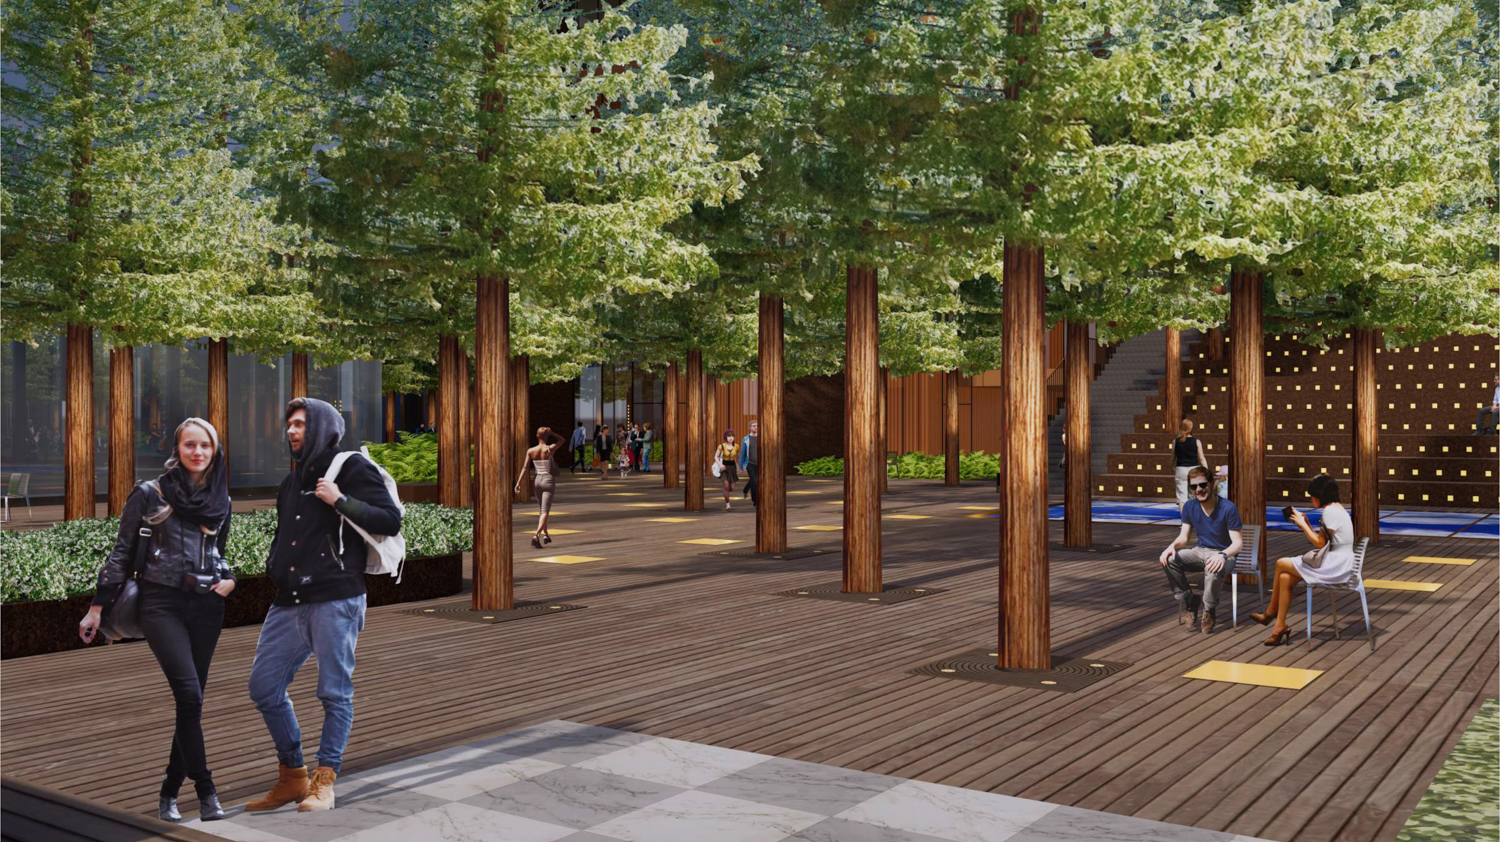 The City Grove urban forest concept, design by PWP Landscape Architecture